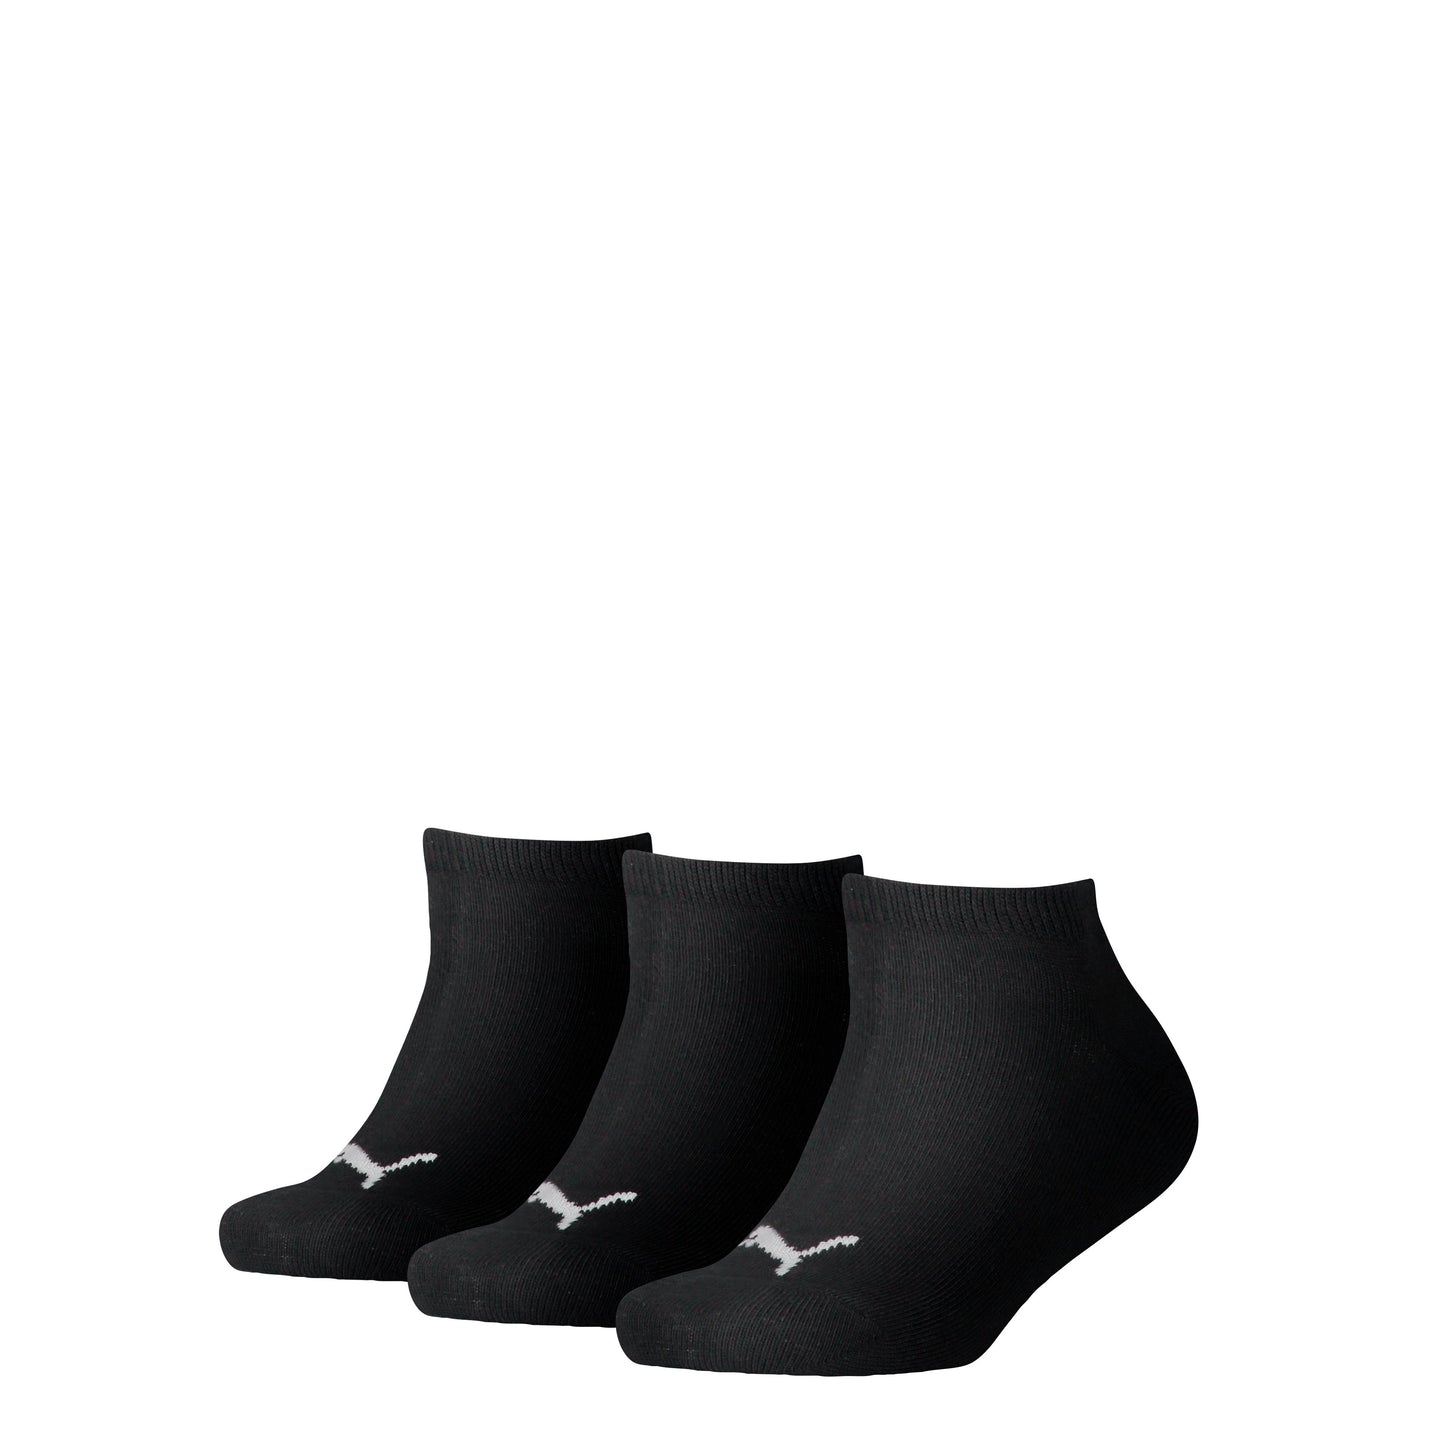 PUMA Kids Invisible Socks  (3 pairs for $15)  (6 pairs for $23)